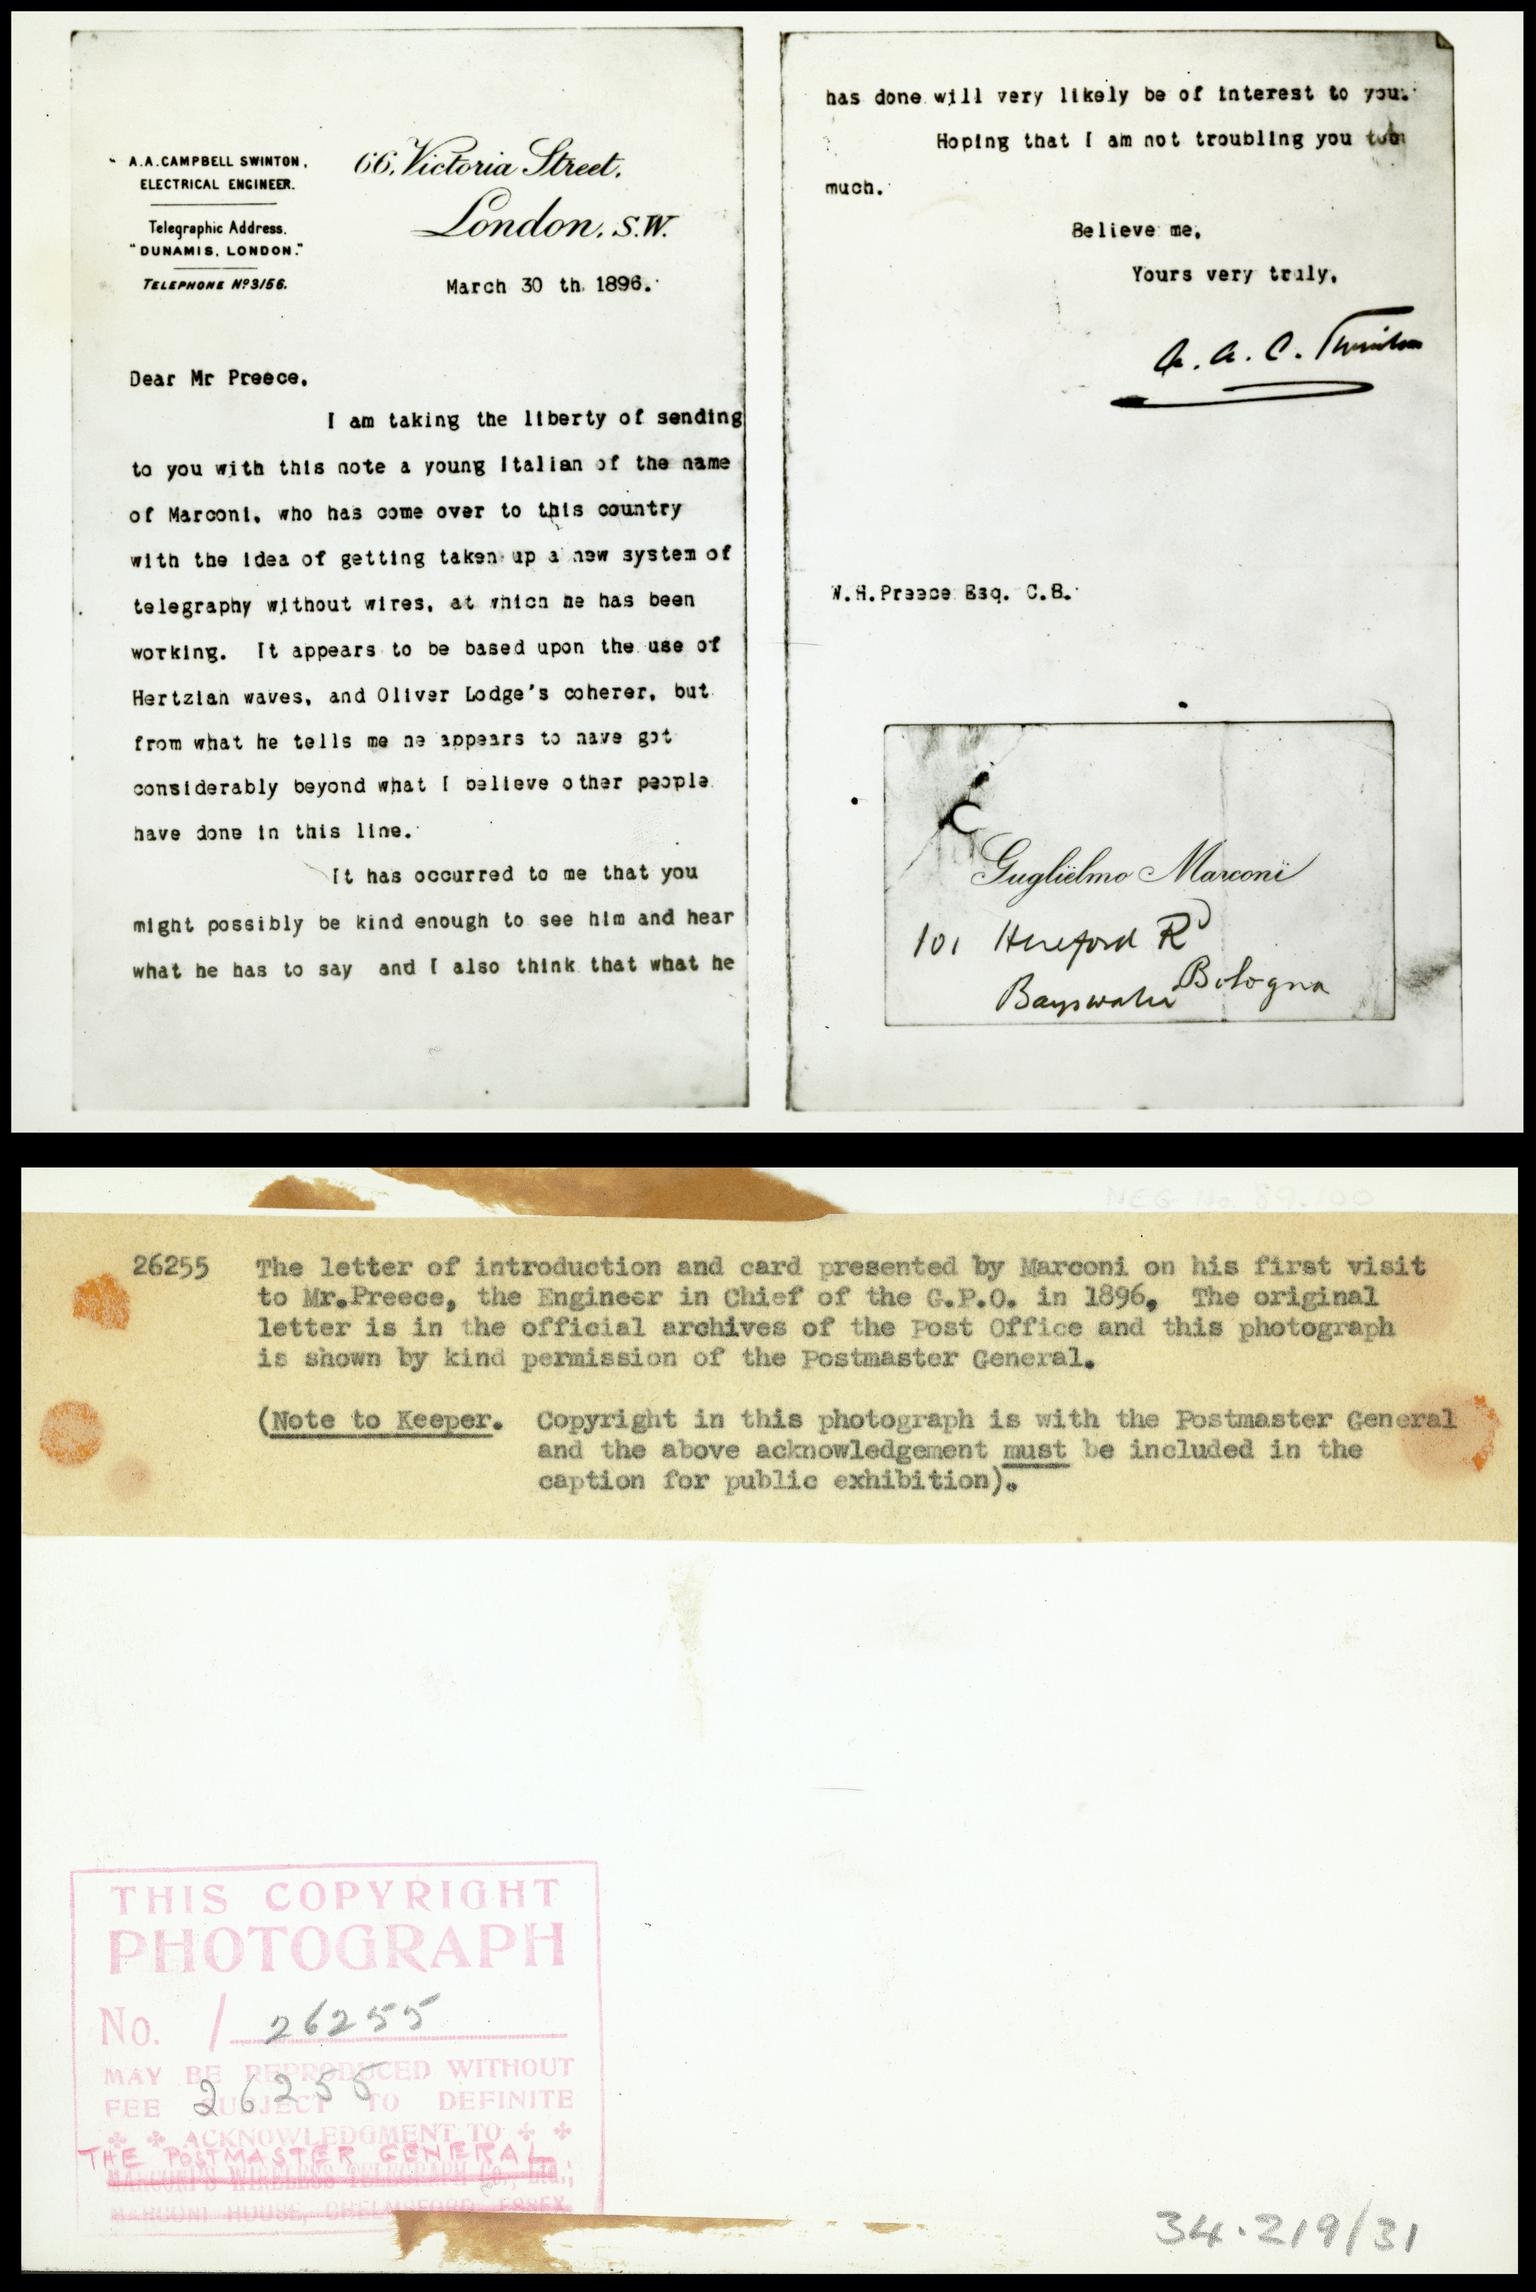 Marconi's letter of introduction, photograph